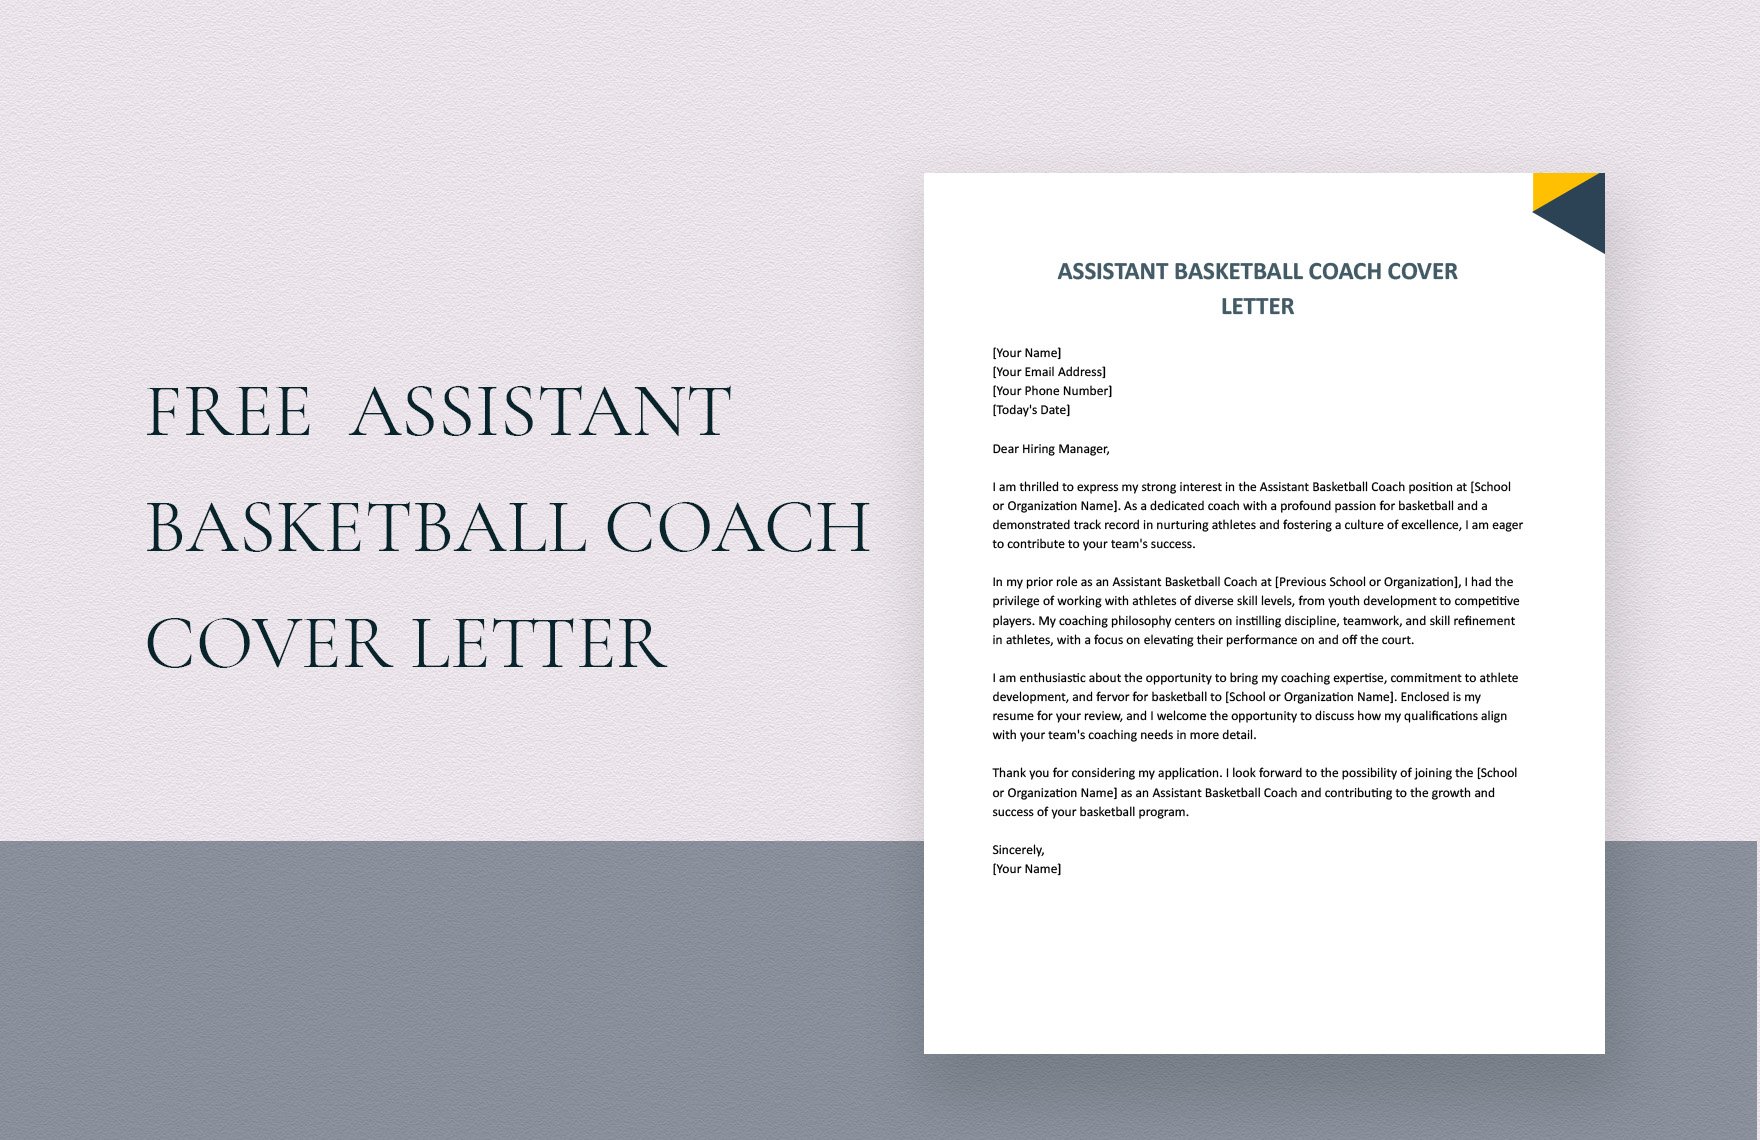 Assistant Basketball Coach Cover Letter